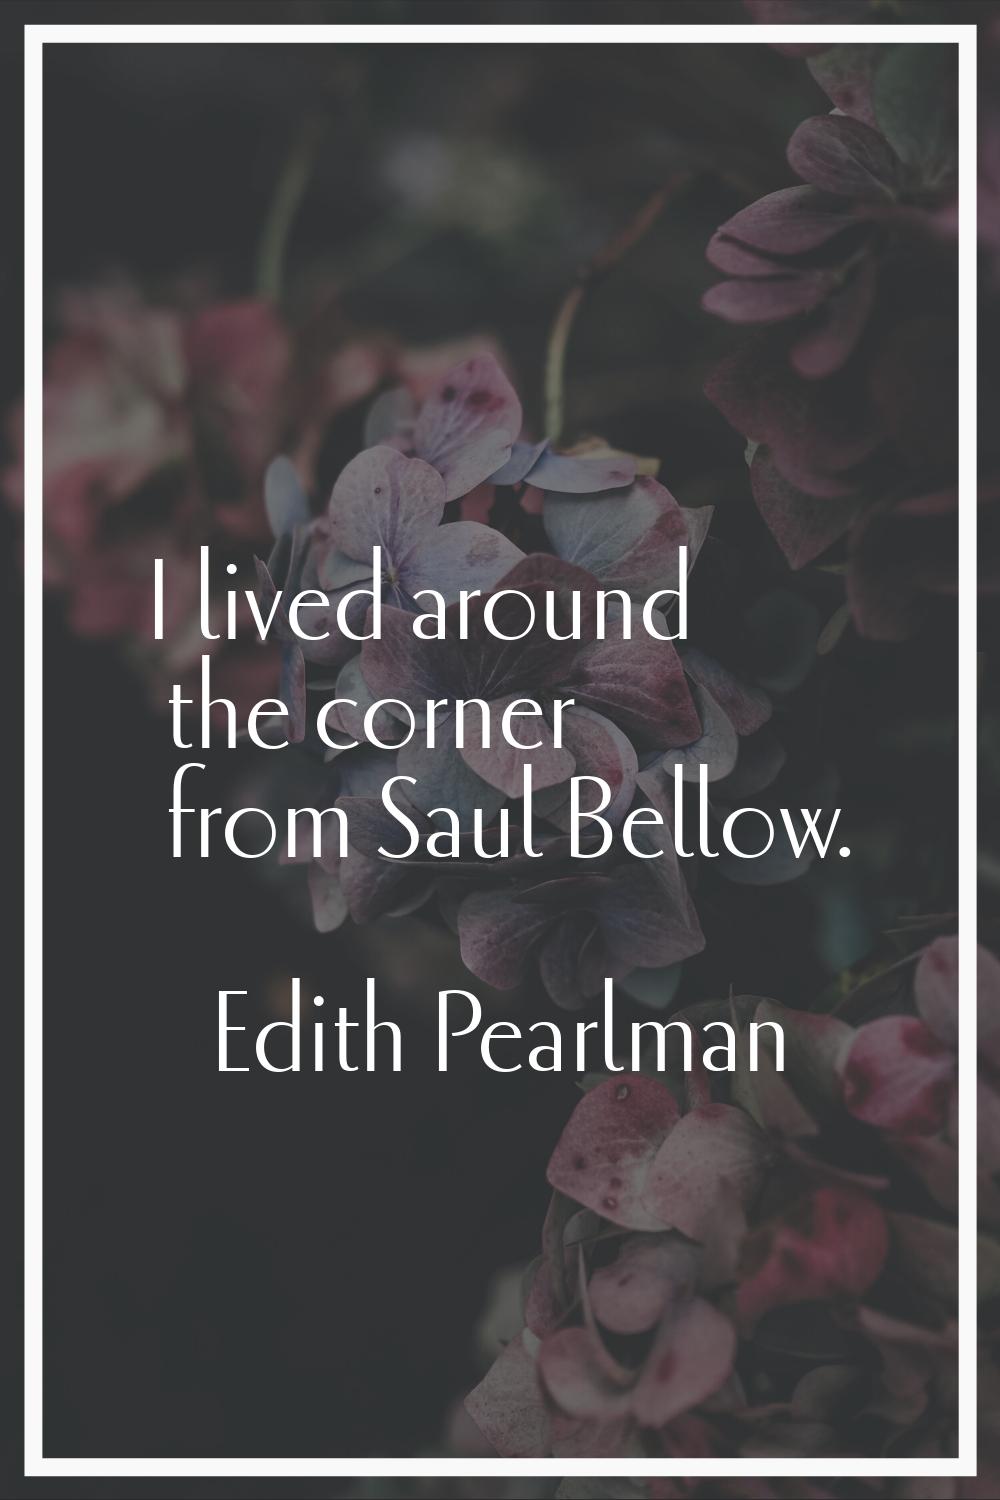 I lived around the corner from Saul Bellow.